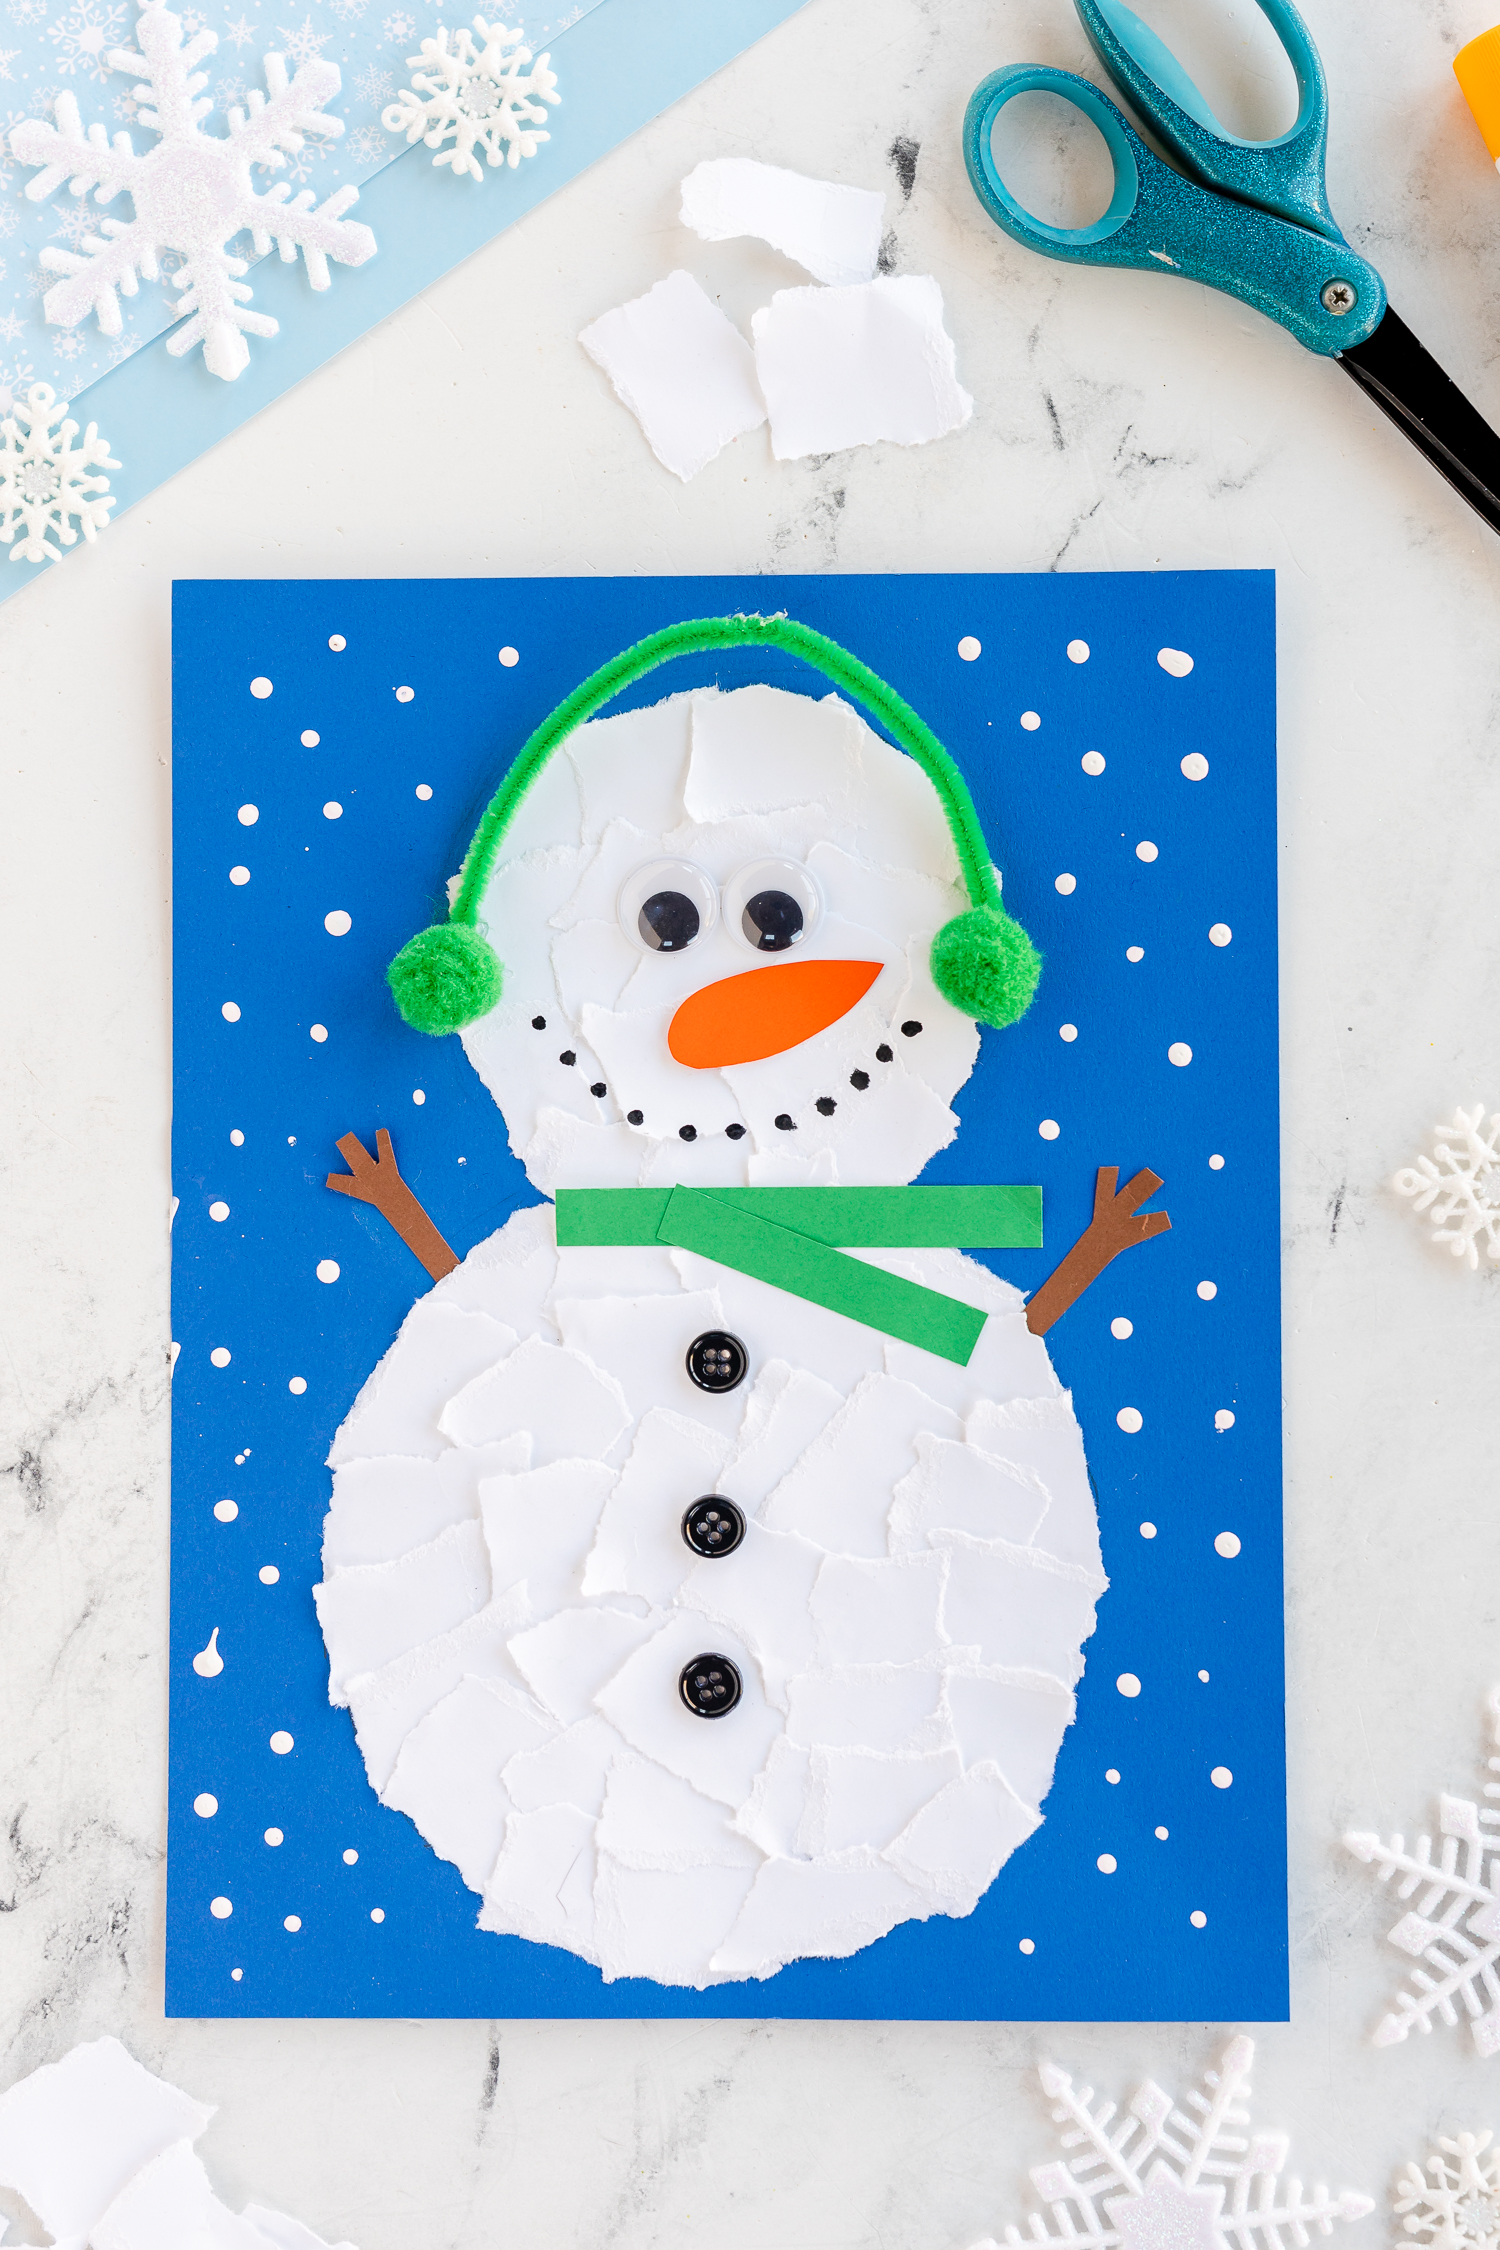 torn paper snowman craft on bright blue paper with green scarf and earmuffs
